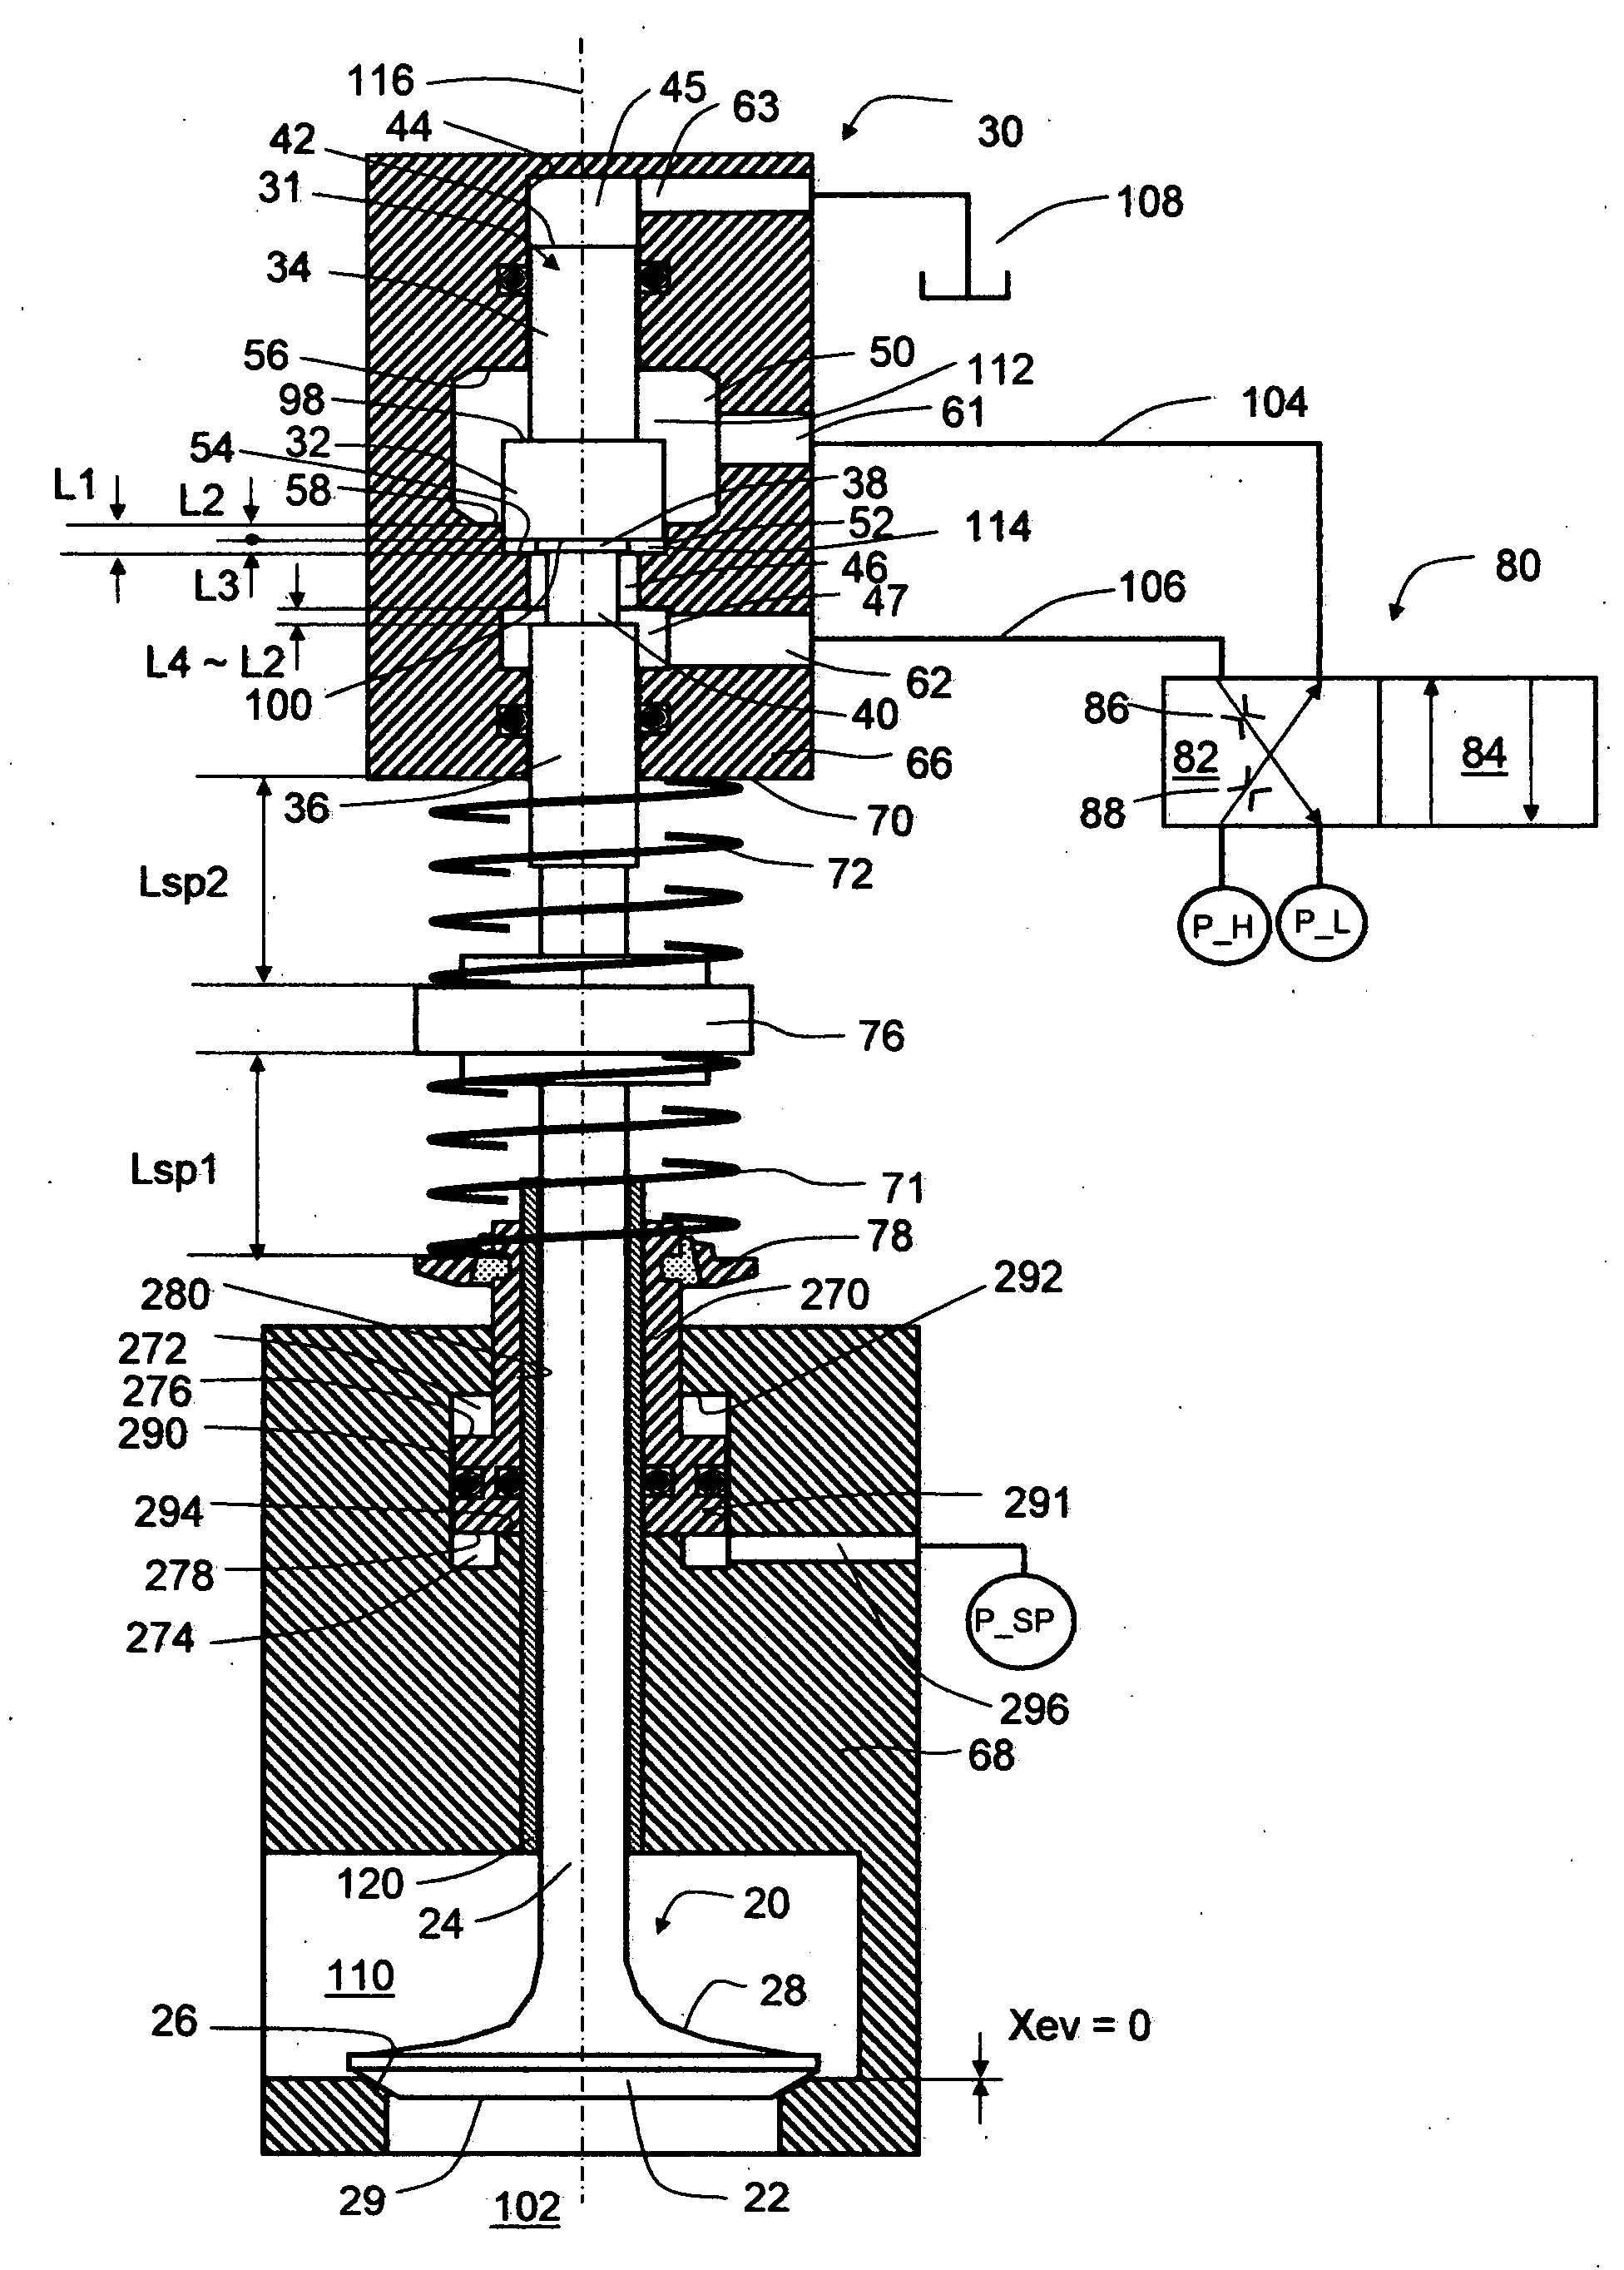 Variable valve actuator with latch at one end